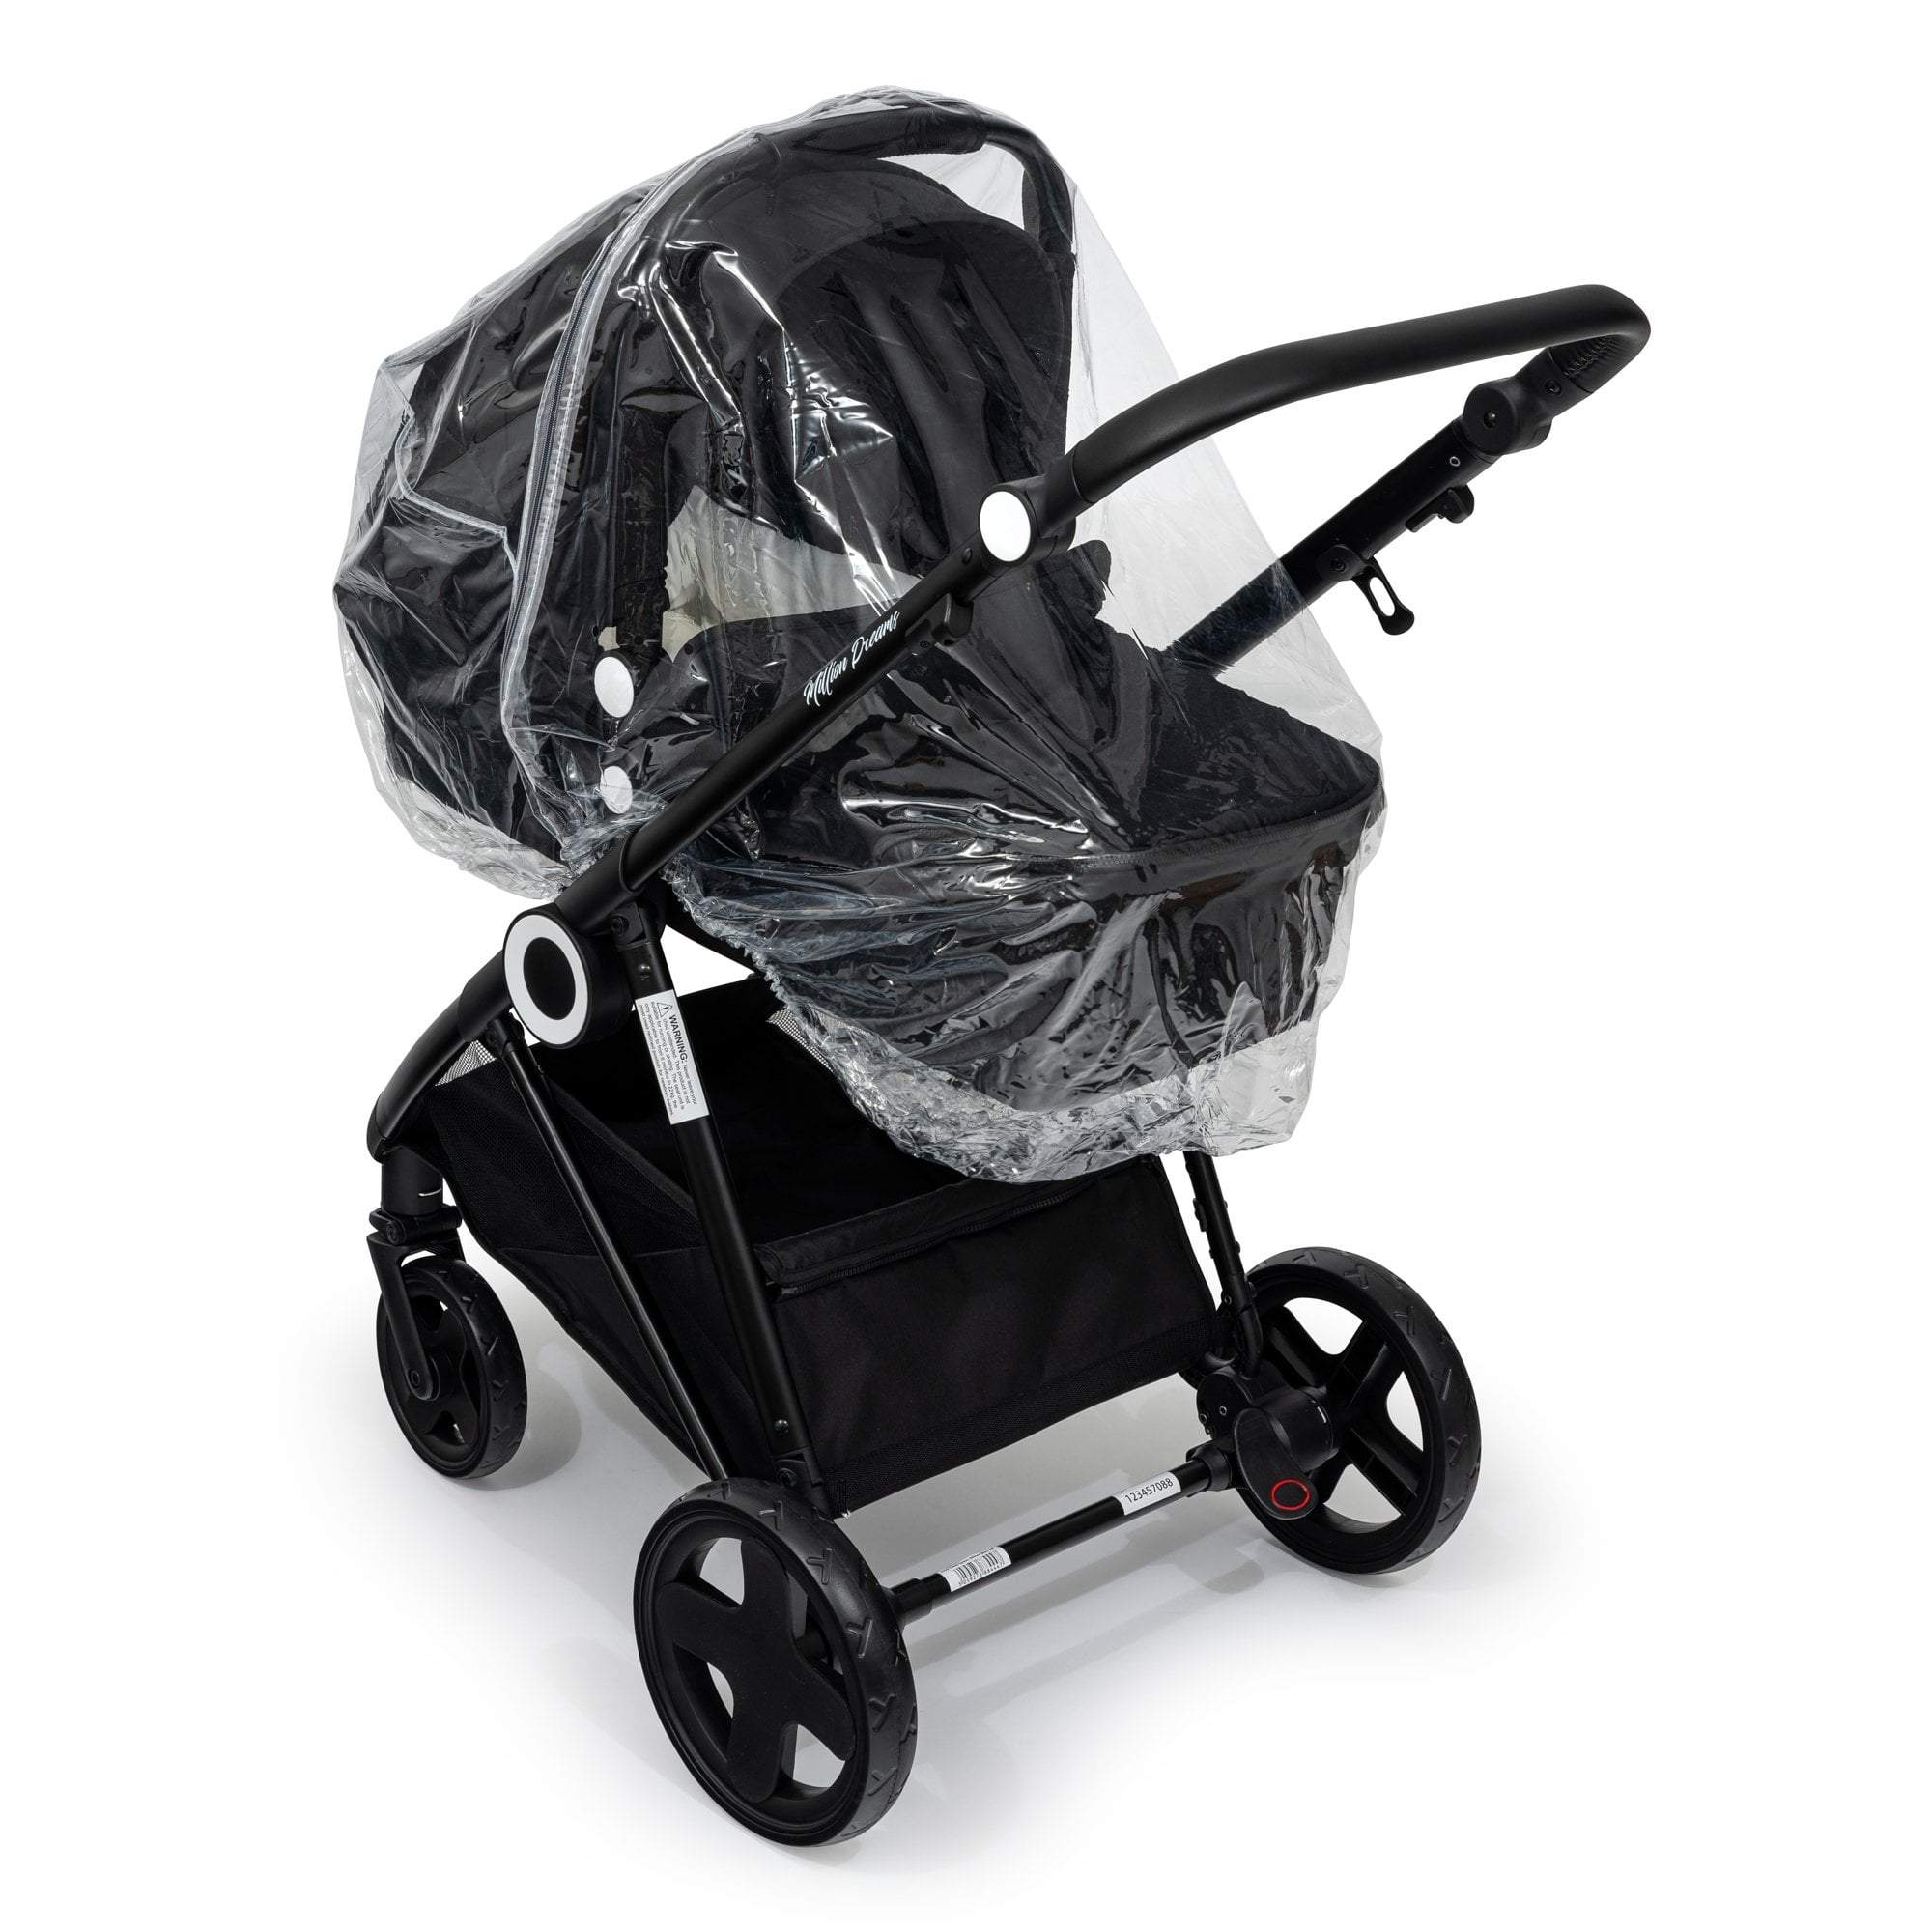 Carrycot Raincover Compatible With Zeta - Fits All Models - For Your Little One